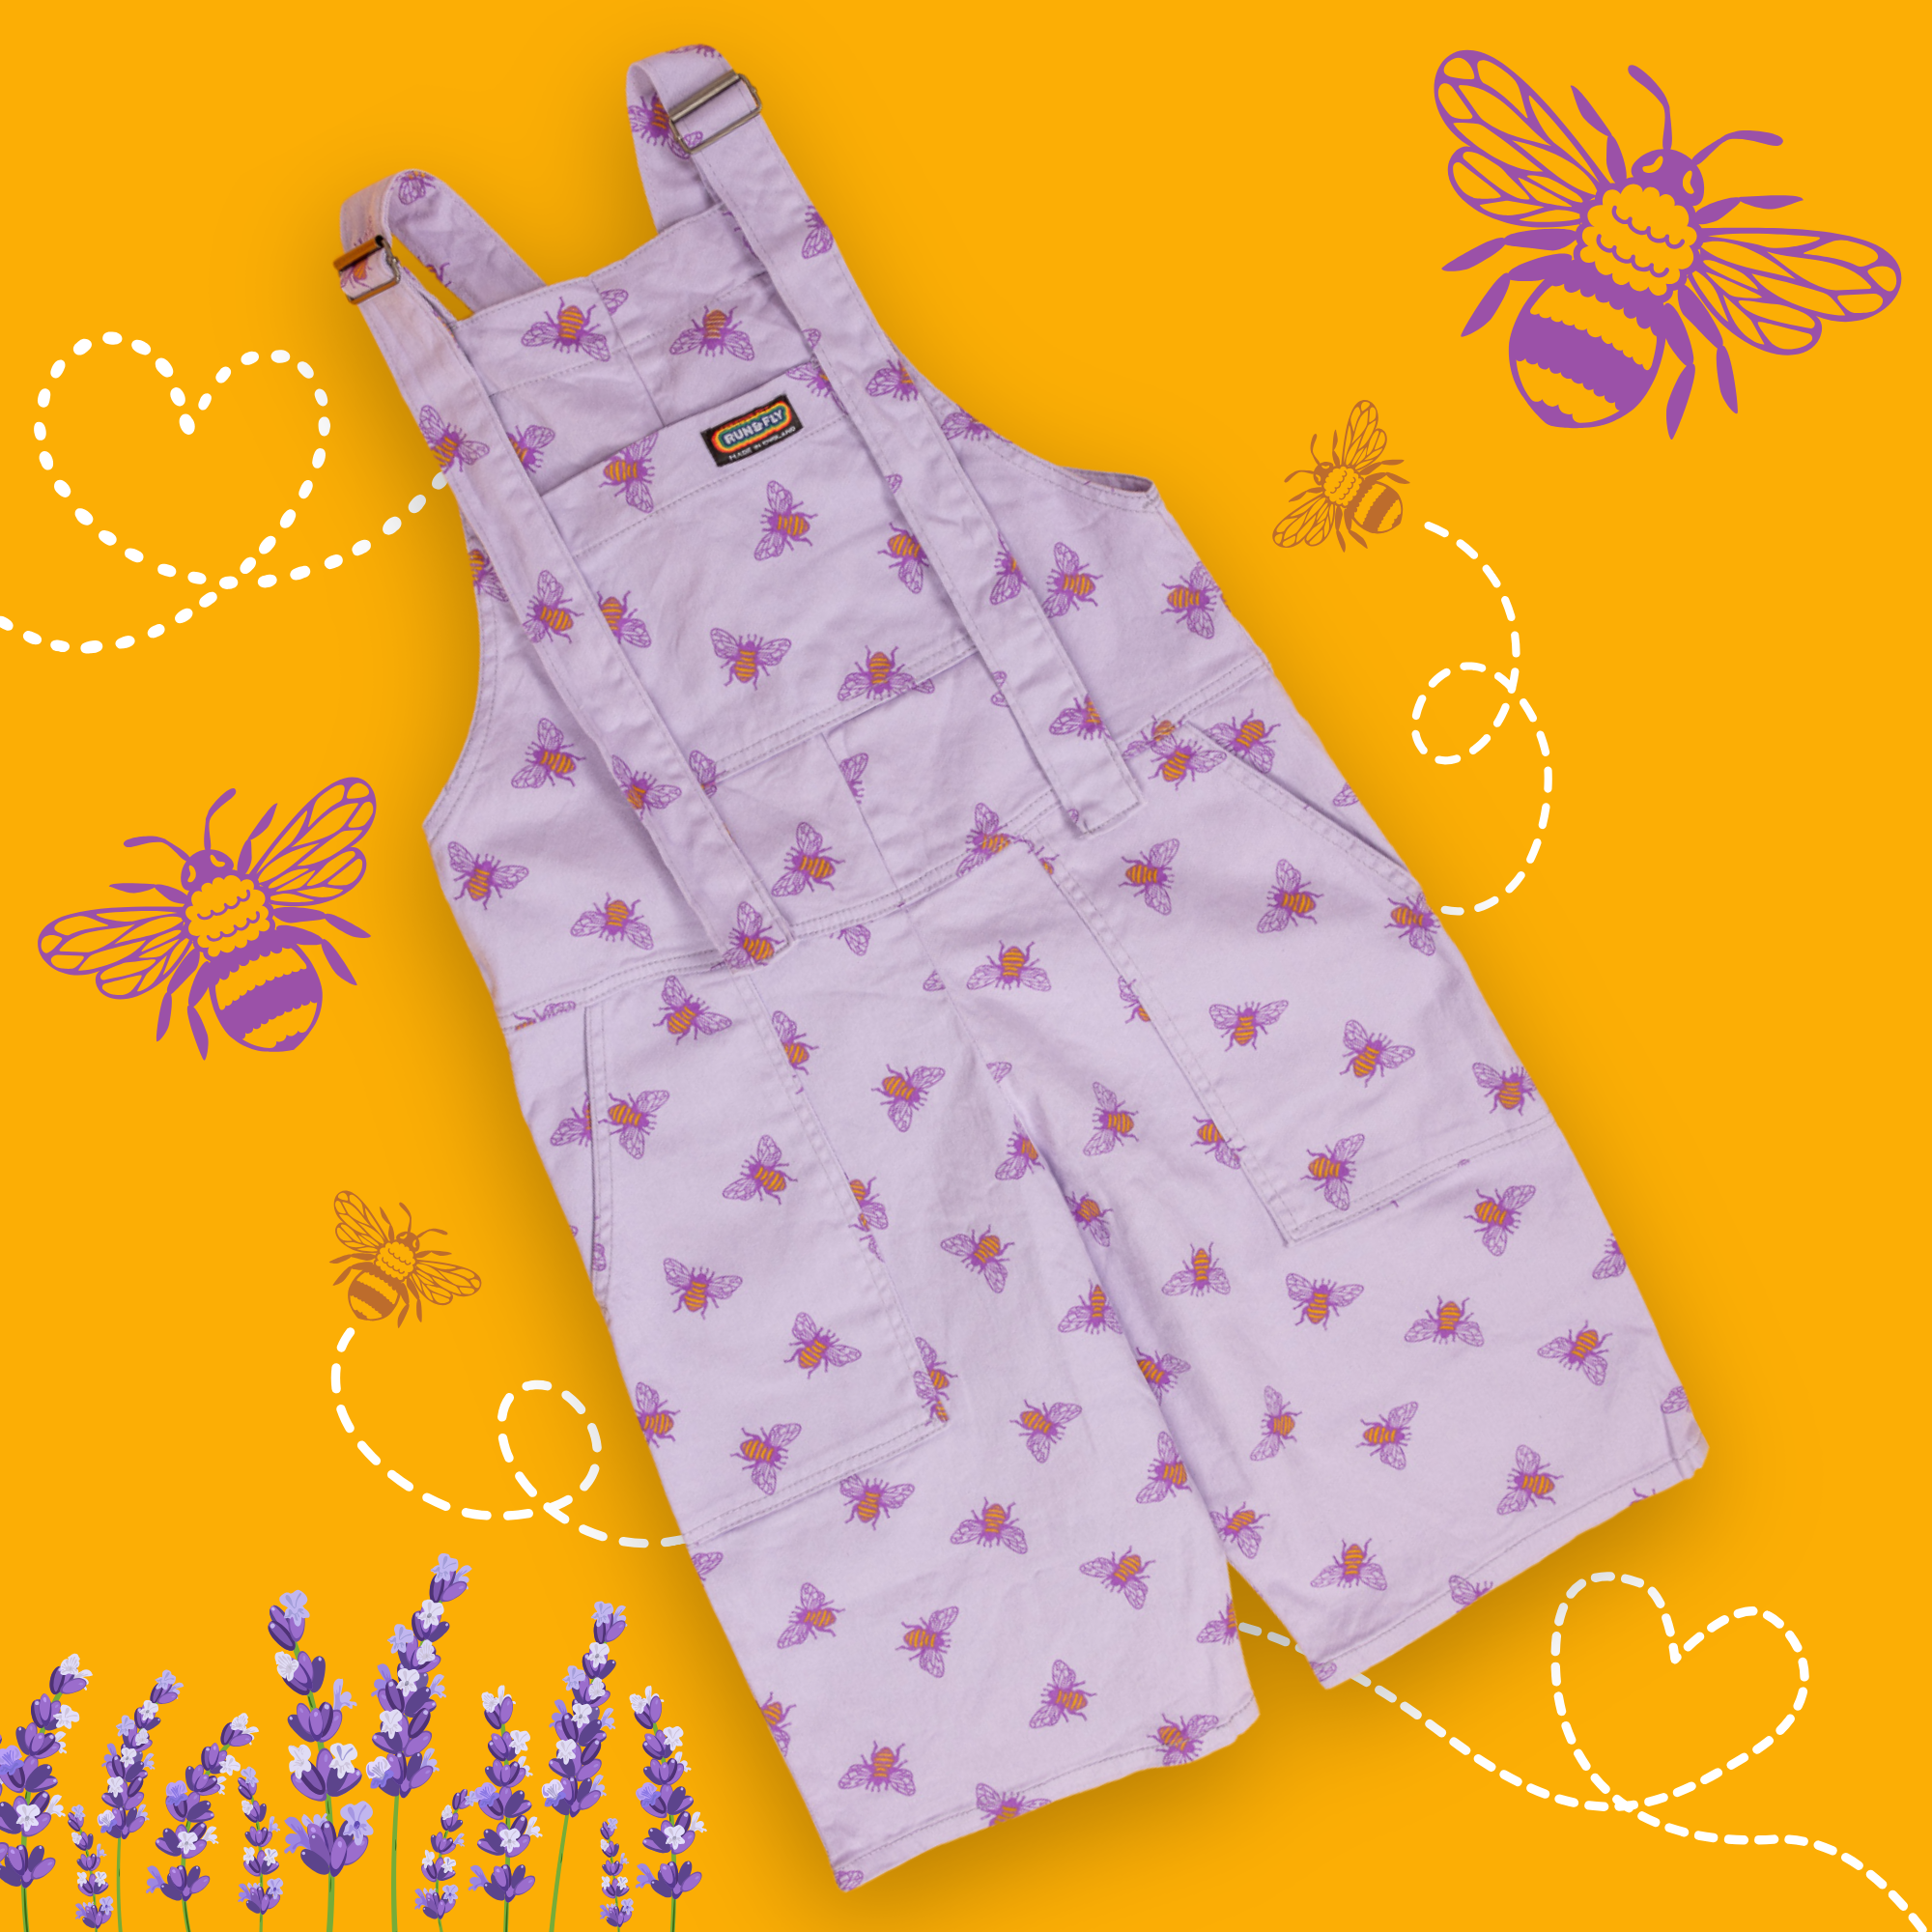 Flat lay of lavender base colour dungaree shorts with yellow buzzy bumble bees all over with the run and fly rainbow tag sewn on the top of the front bib. The background of the photo is yellow with trailing heart line following bees and lavender sprigs at the bottom.